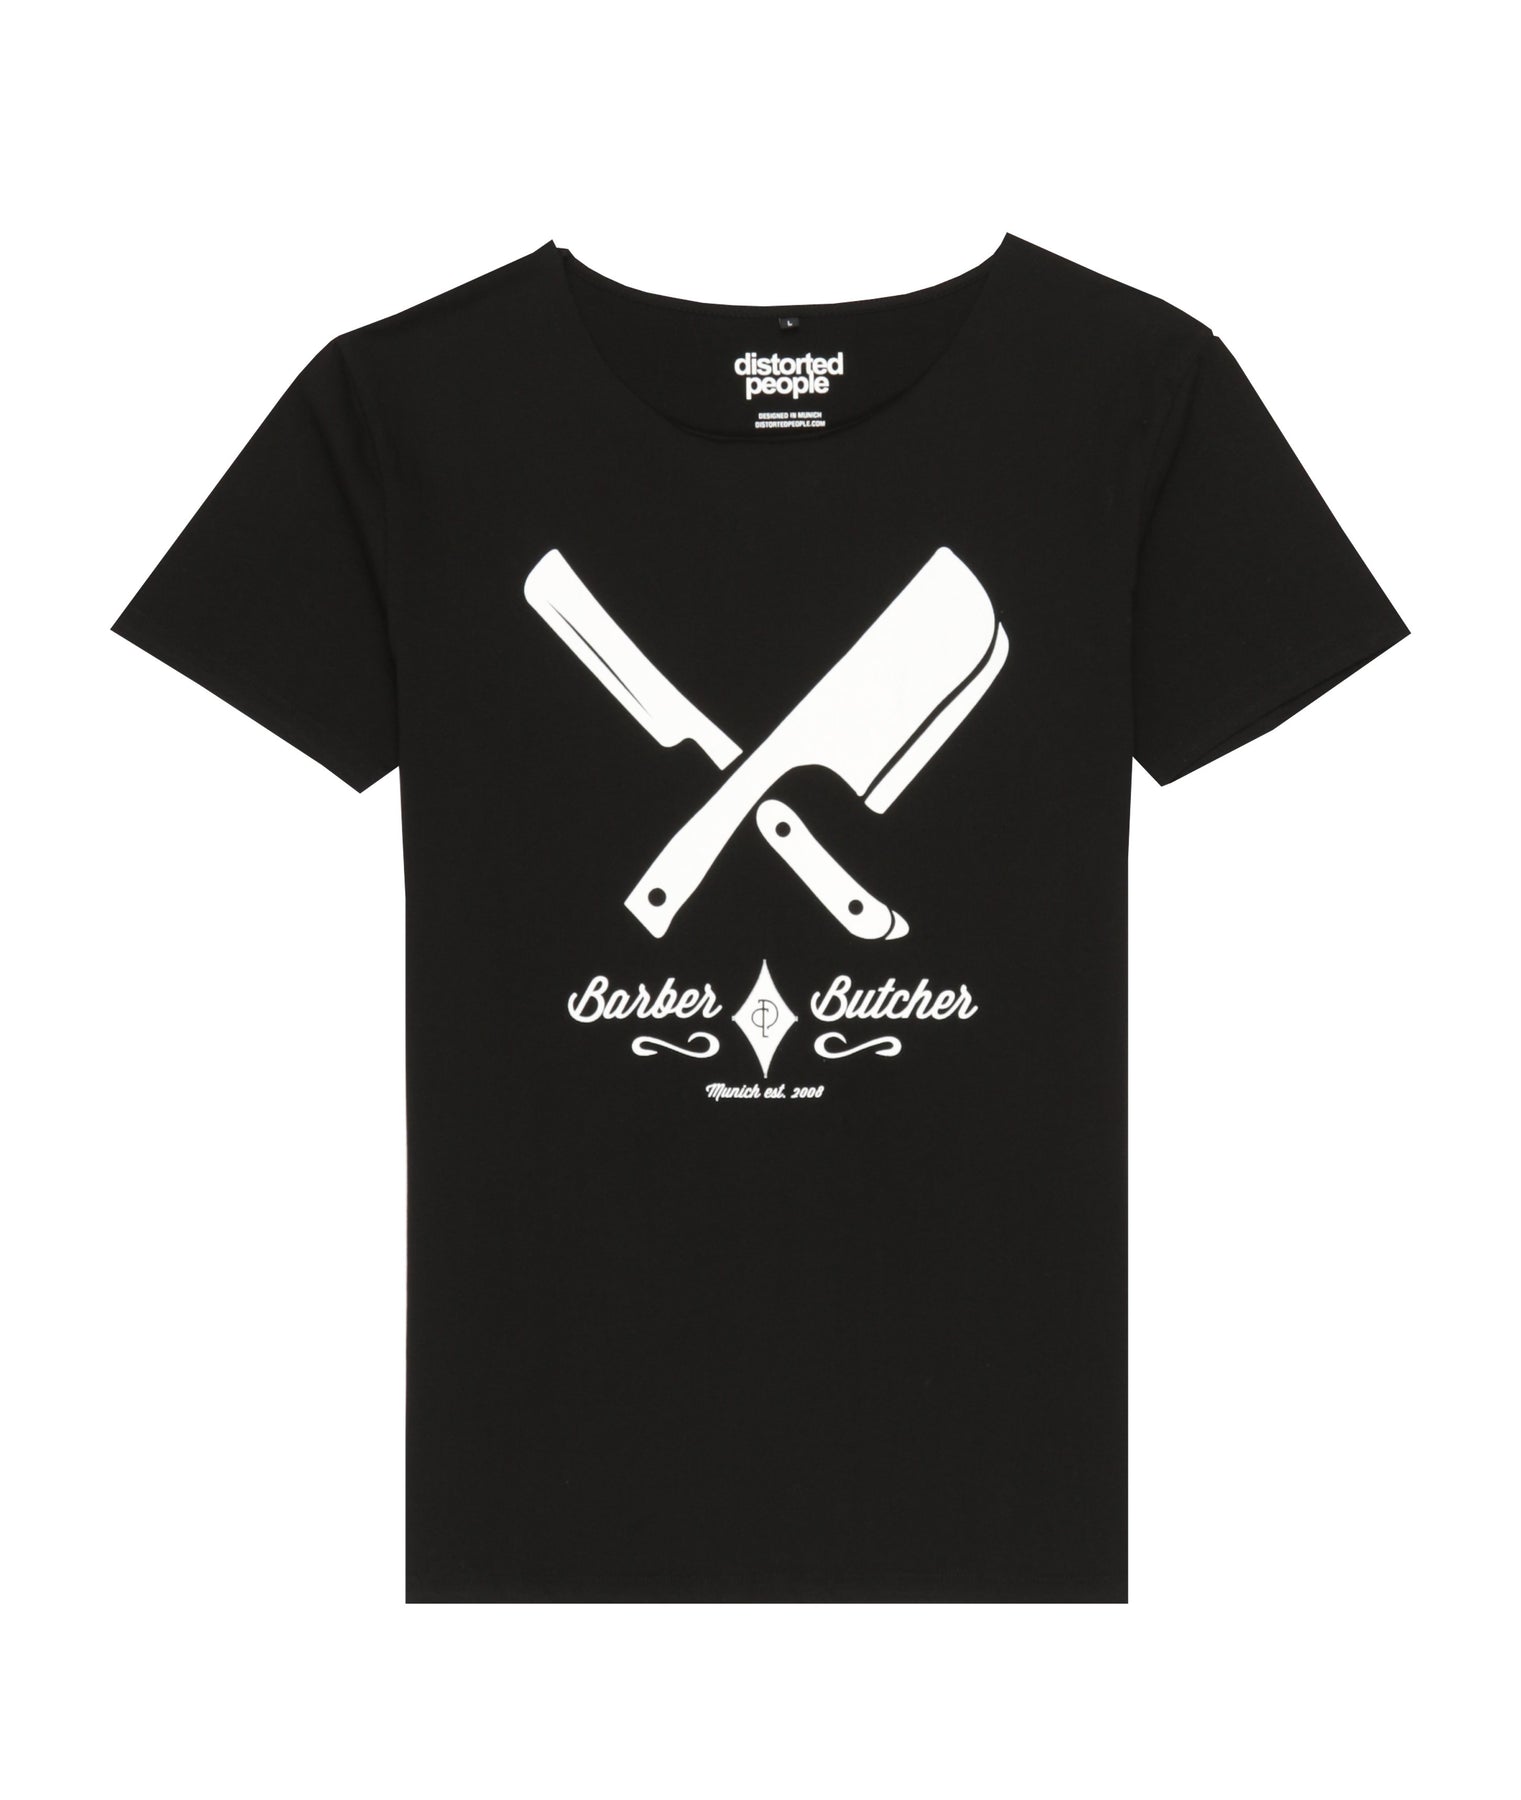 Black Barber & Blades | USA T-Shirt People Distorted Distorted Butcher – Neck People Cut